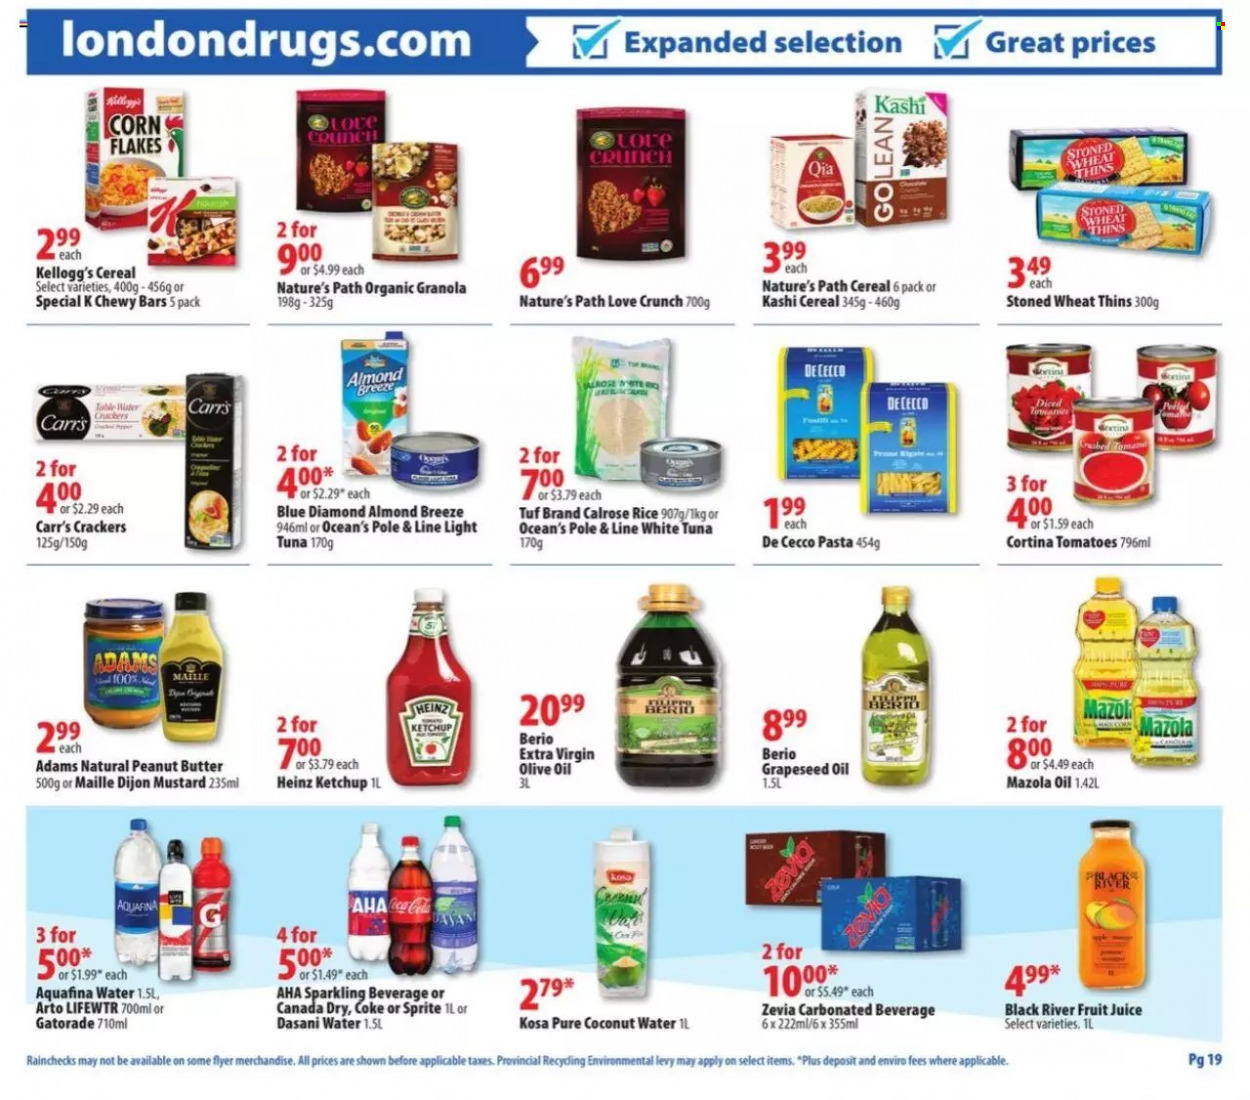 thumbnail - London Drugs Flyer - October 22, 2021 - October 27, 2021 - Sales products - crackers, Kellogg's, Thins, tuna, Heinz, light tuna, cereals, corn flakes, rice, pasta, mustard, extra virgin olive oil, olive oil, oil, grape seed oil, peanut butter, Blue Diamond, Canada Dry, Coca-Cola, Sprite, juice, fruit juice, coconut water, Gatorade, Aquafina, Lifewtr, table, granola, ketchup. Page 19.